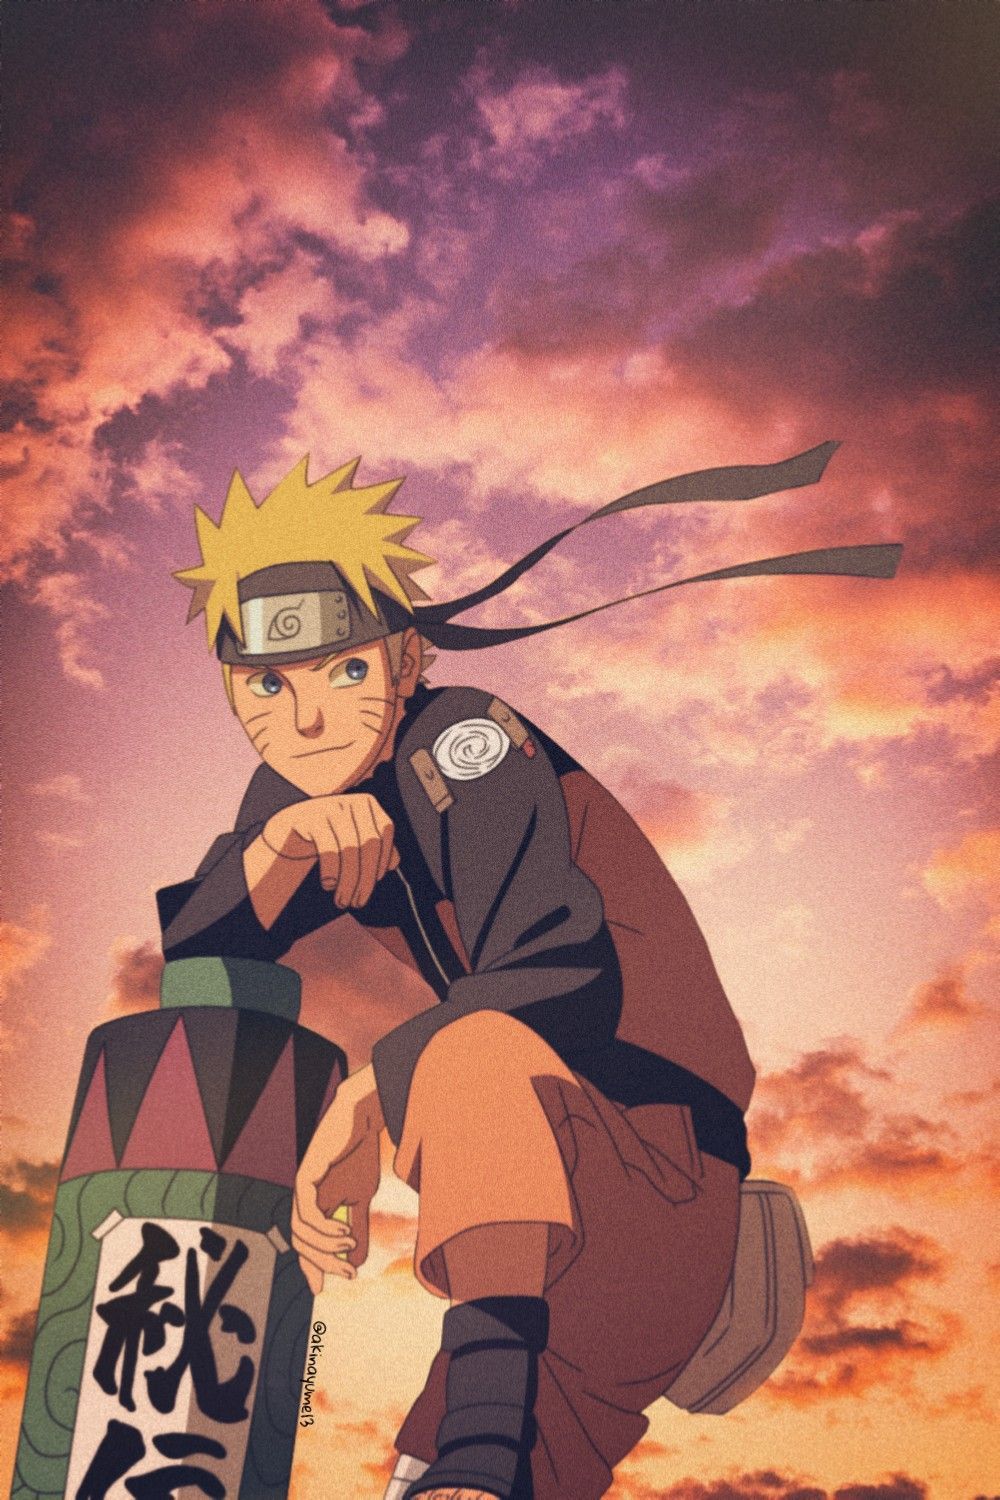 Naruto Iphone Wallpapers